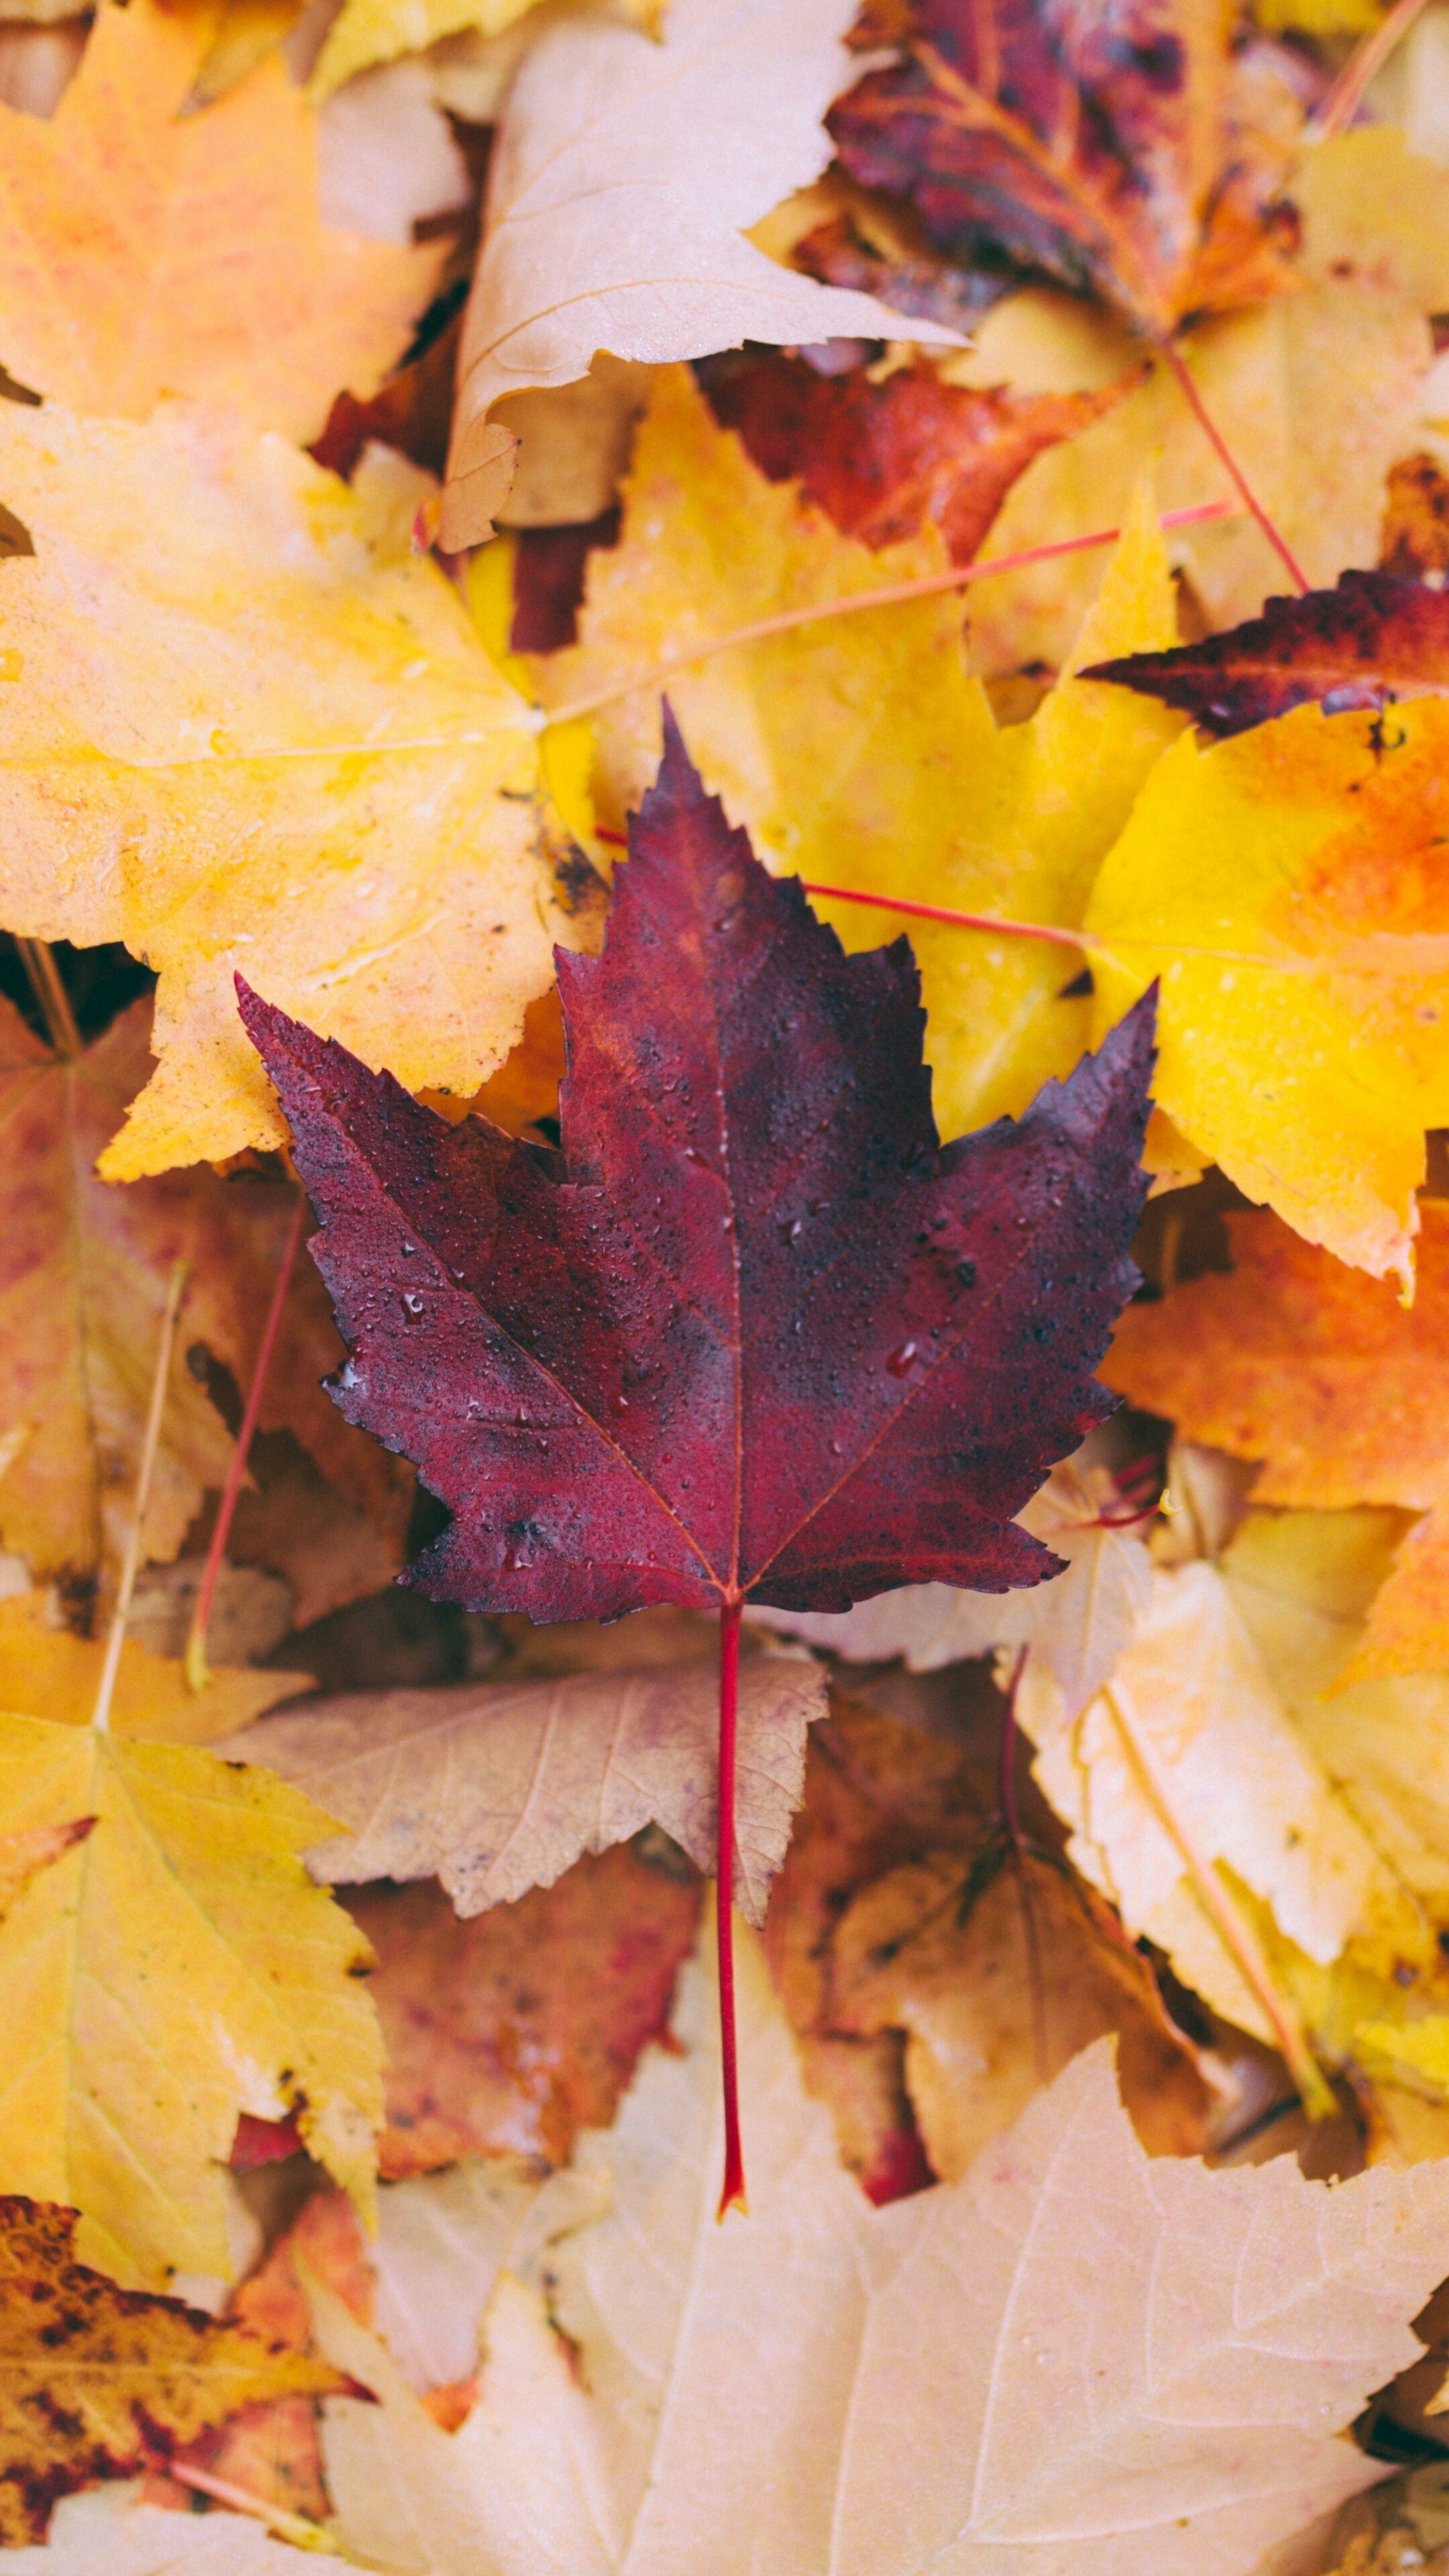 Leaf: Autumn, The primary organs responsible for transpiration and guttation in most plants. 2160x3840 4K Background.